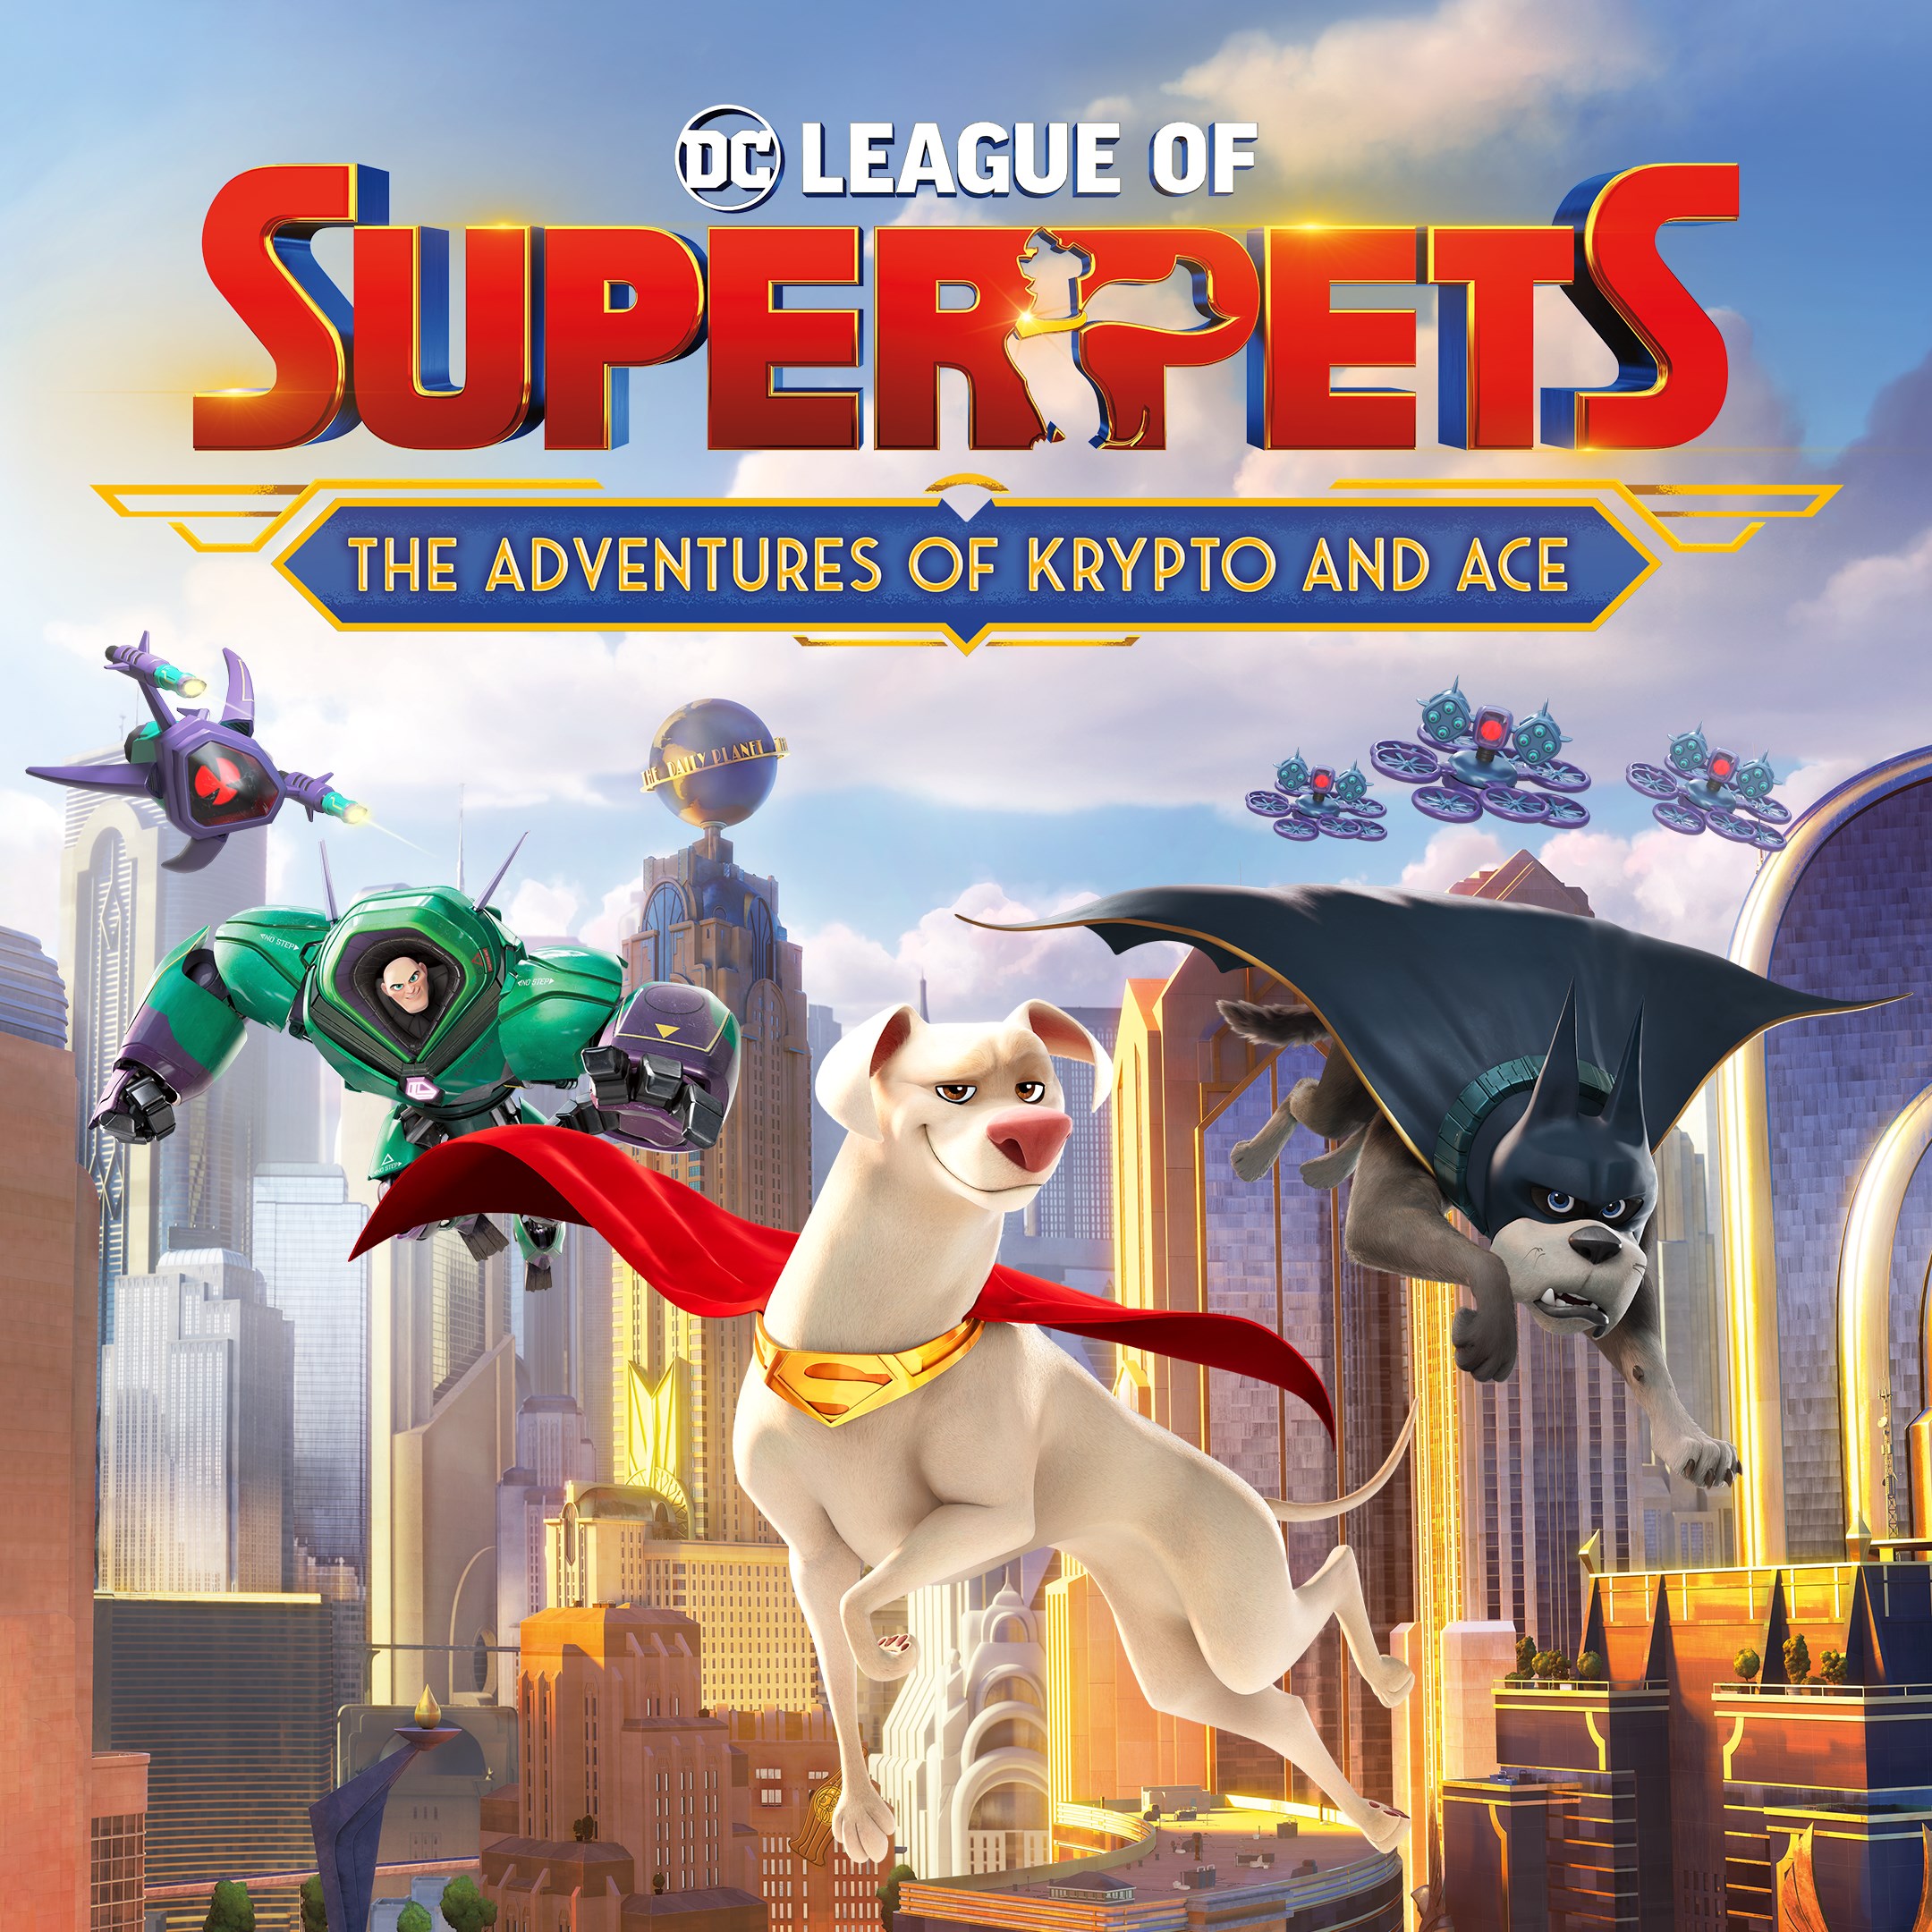 DC League of Super-Pets: The Adventures of Krypto and Ace technical specifications for laptop